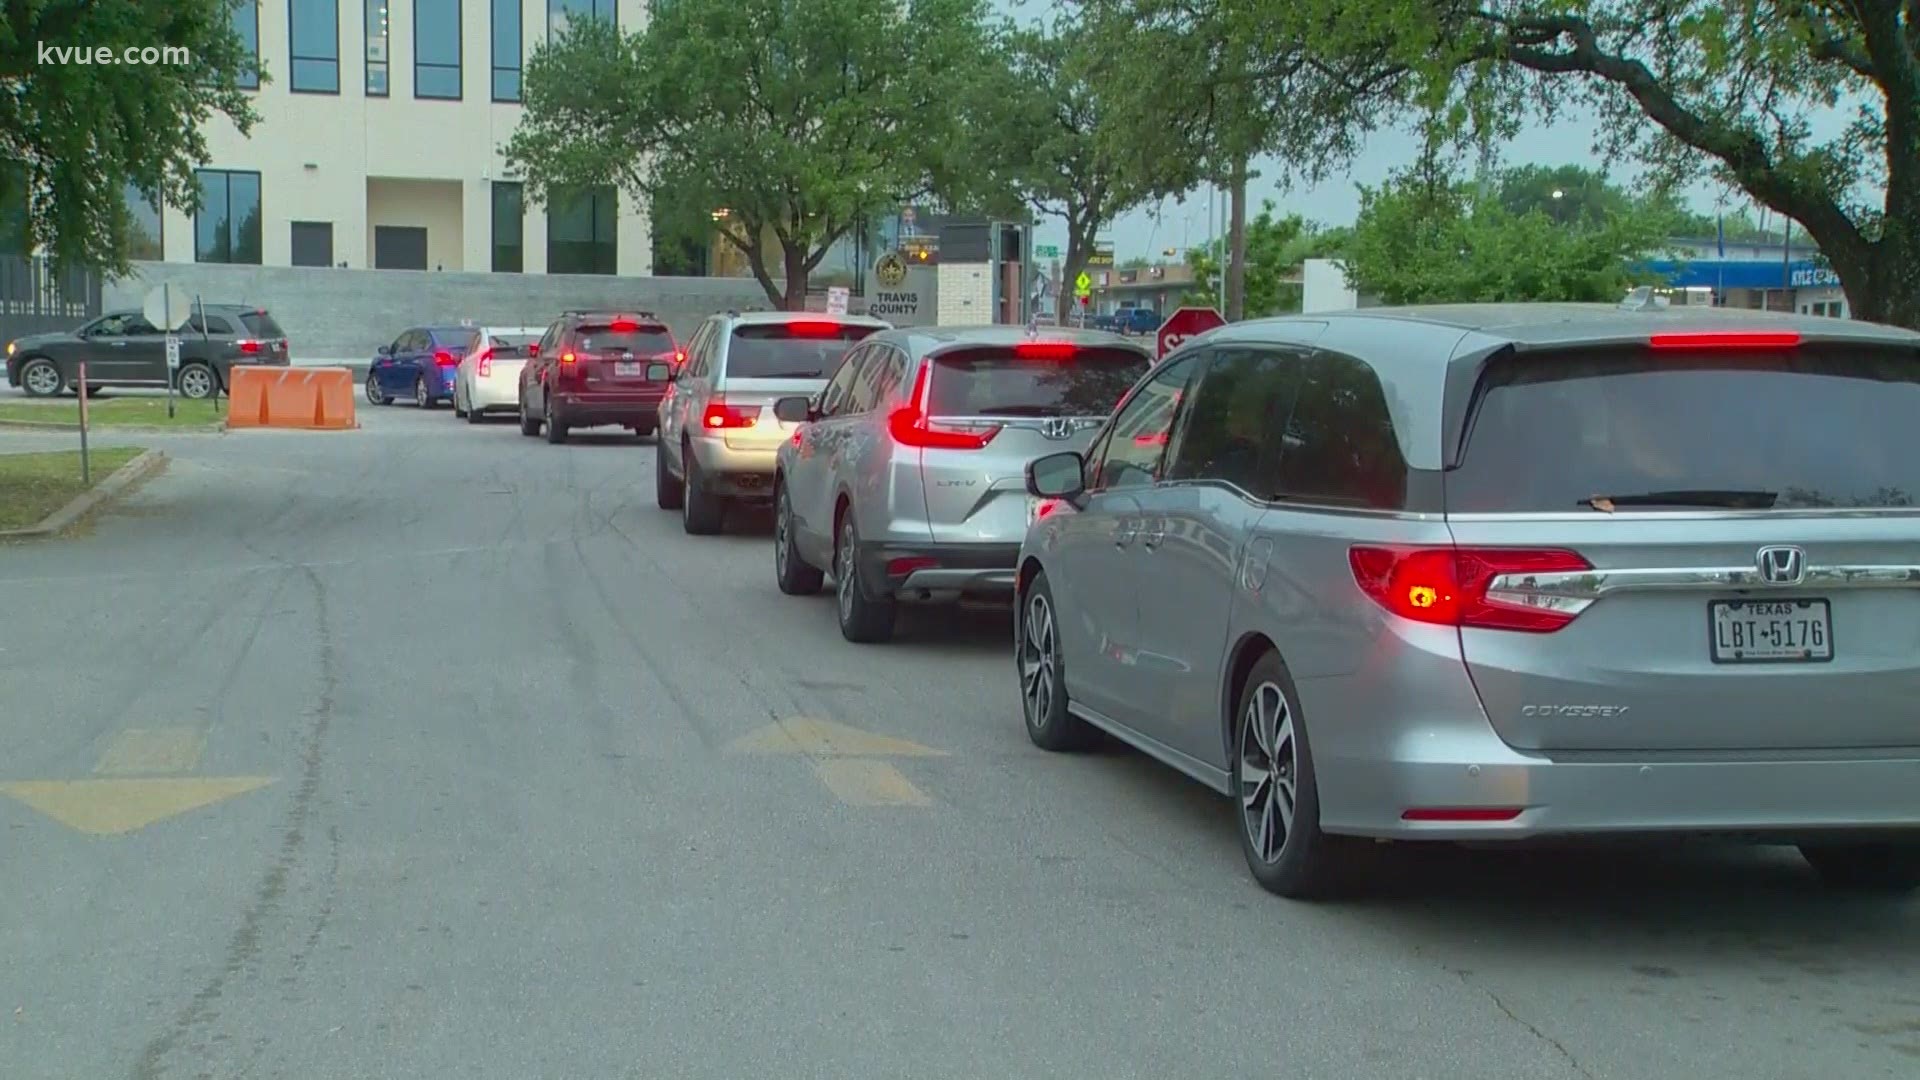 Texans have until the end of the day on April 14 to complete overdue transactions, the Texas DMV said. There is no grace period after the deadline.